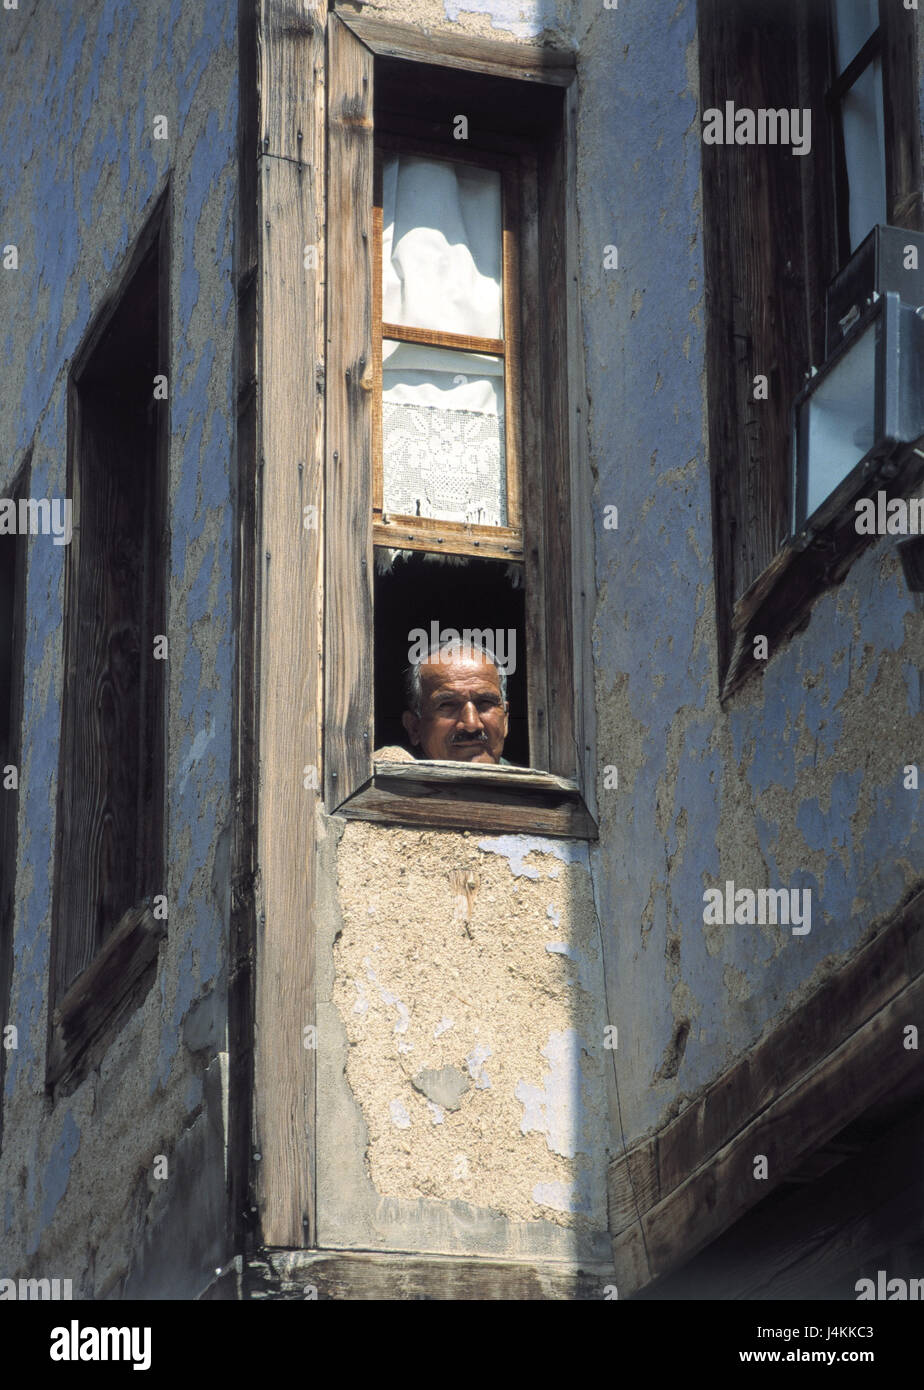 Turkey, Anatolia, house facade, man, view window no model release! People, in Turkish, Turk, middle old person, house, facade, view, curiosity, interest, attention, foreigner, foreign worker, south countries, homes, native country, light, shade Stock Photo